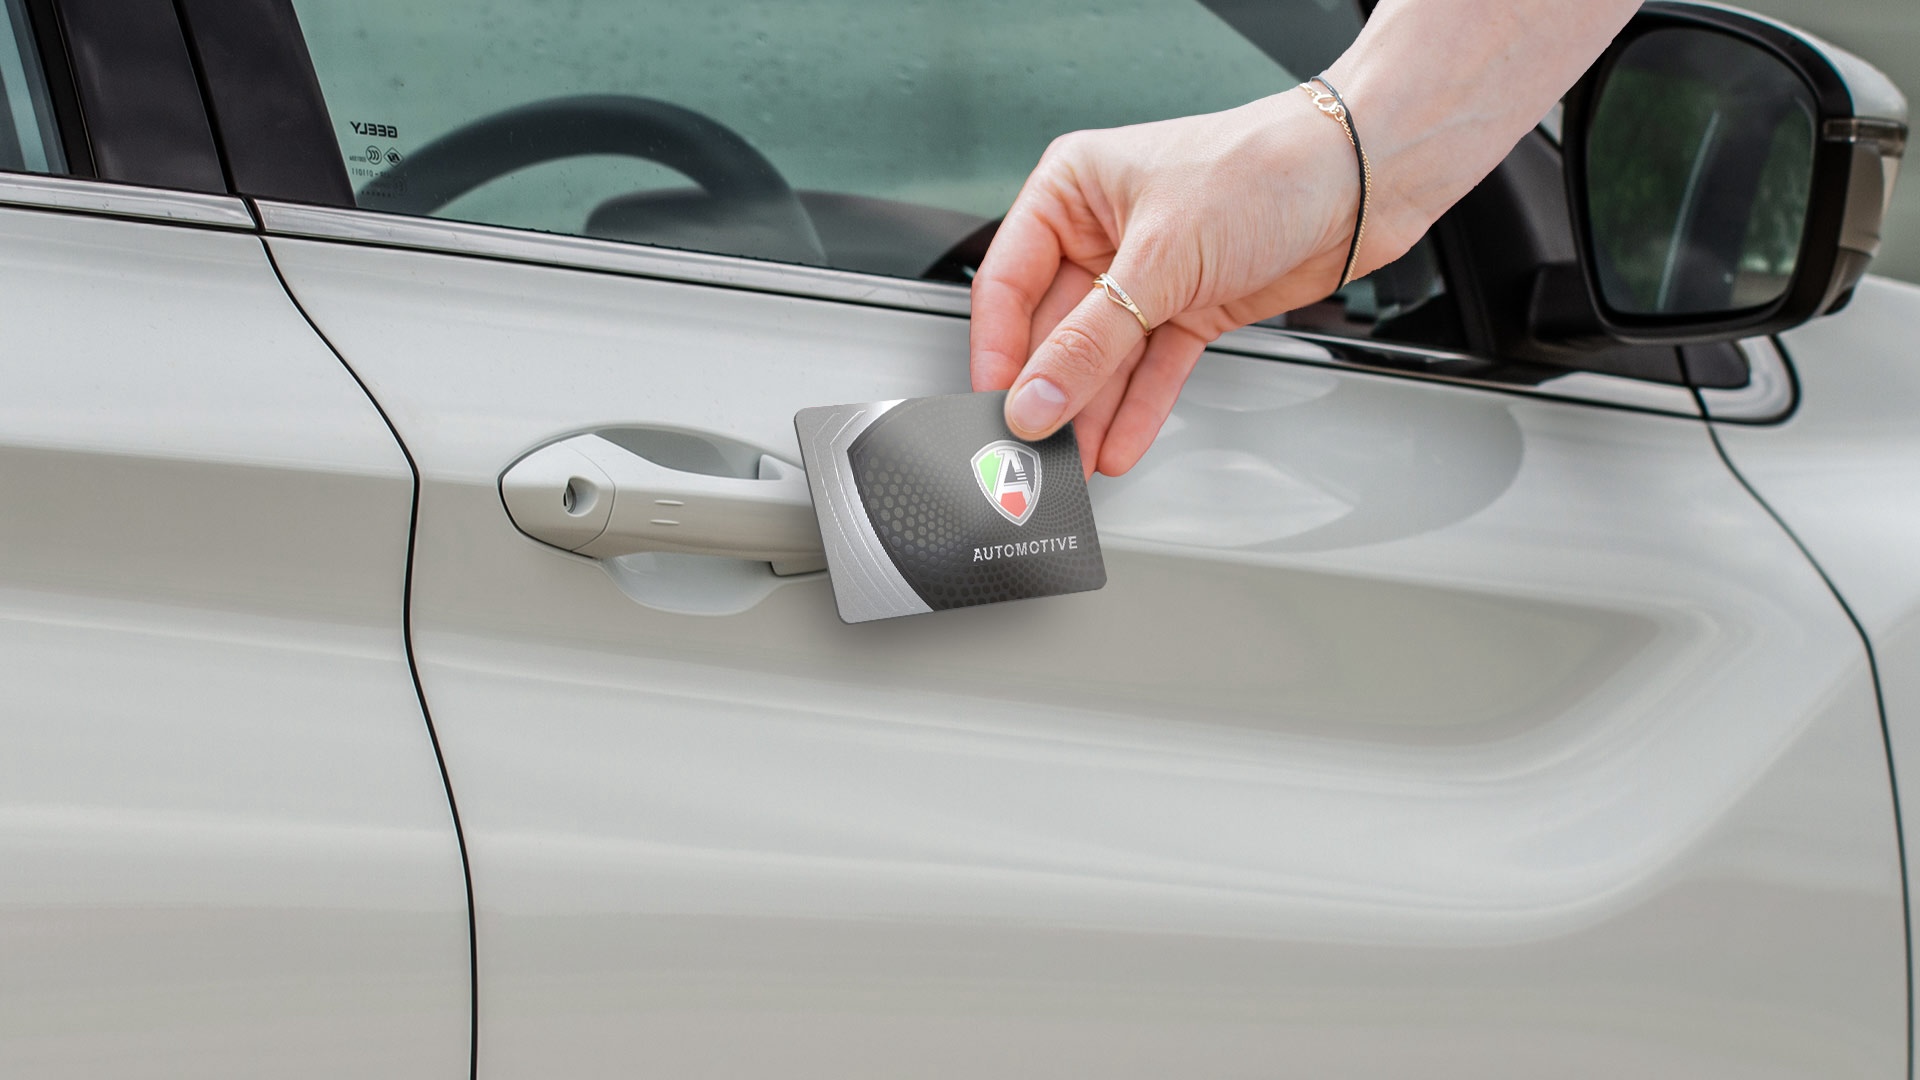 IDEMIA paves way for automotive-grade NFC key cards.